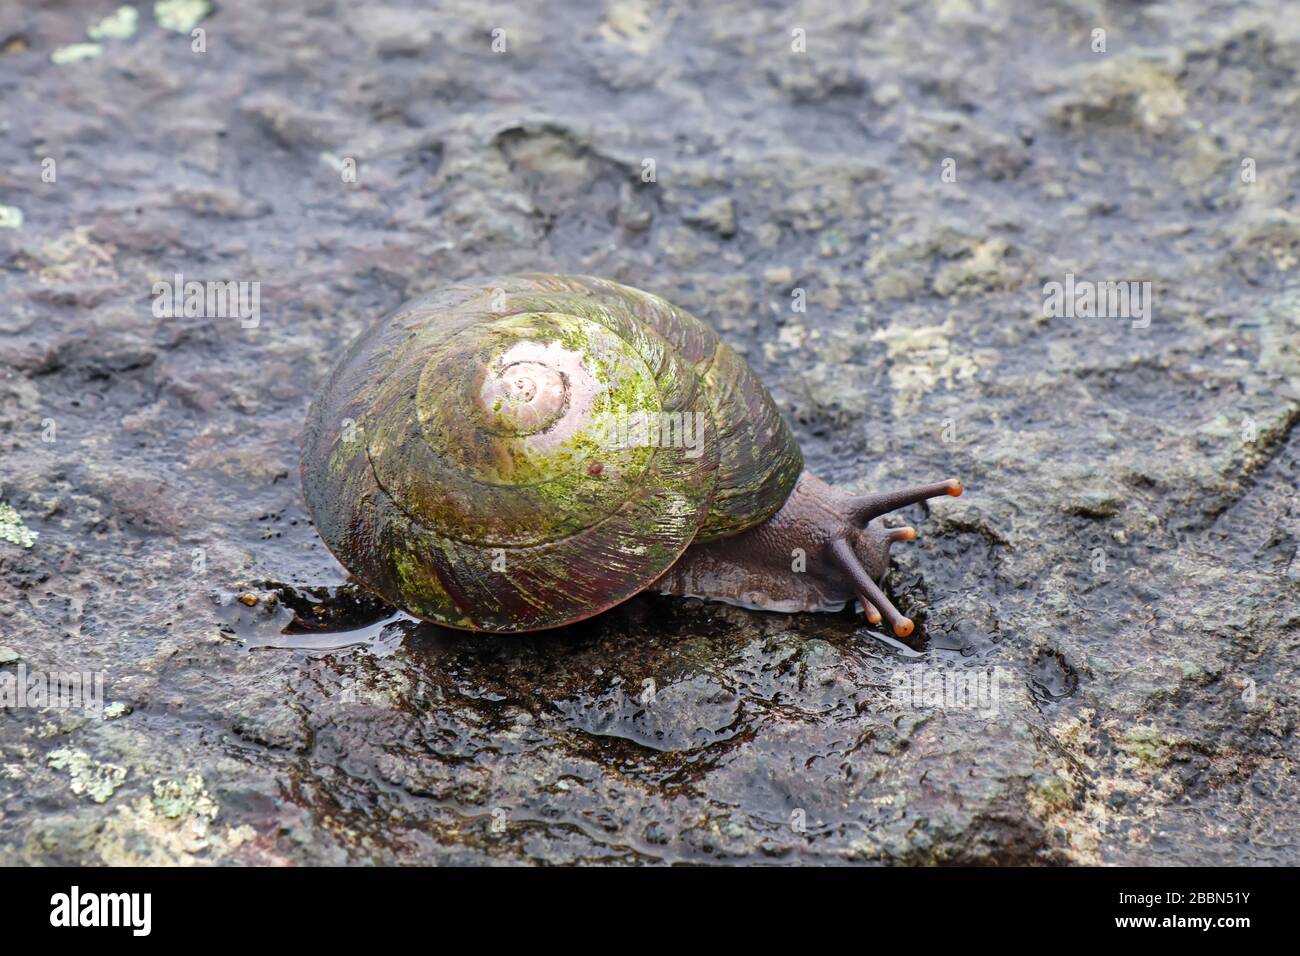 Large native tree snail (Caracolus caracolla) with foot and antennae extended moving along a wet rock in El Yunque National Forest of Puerto Rico Stock Photo